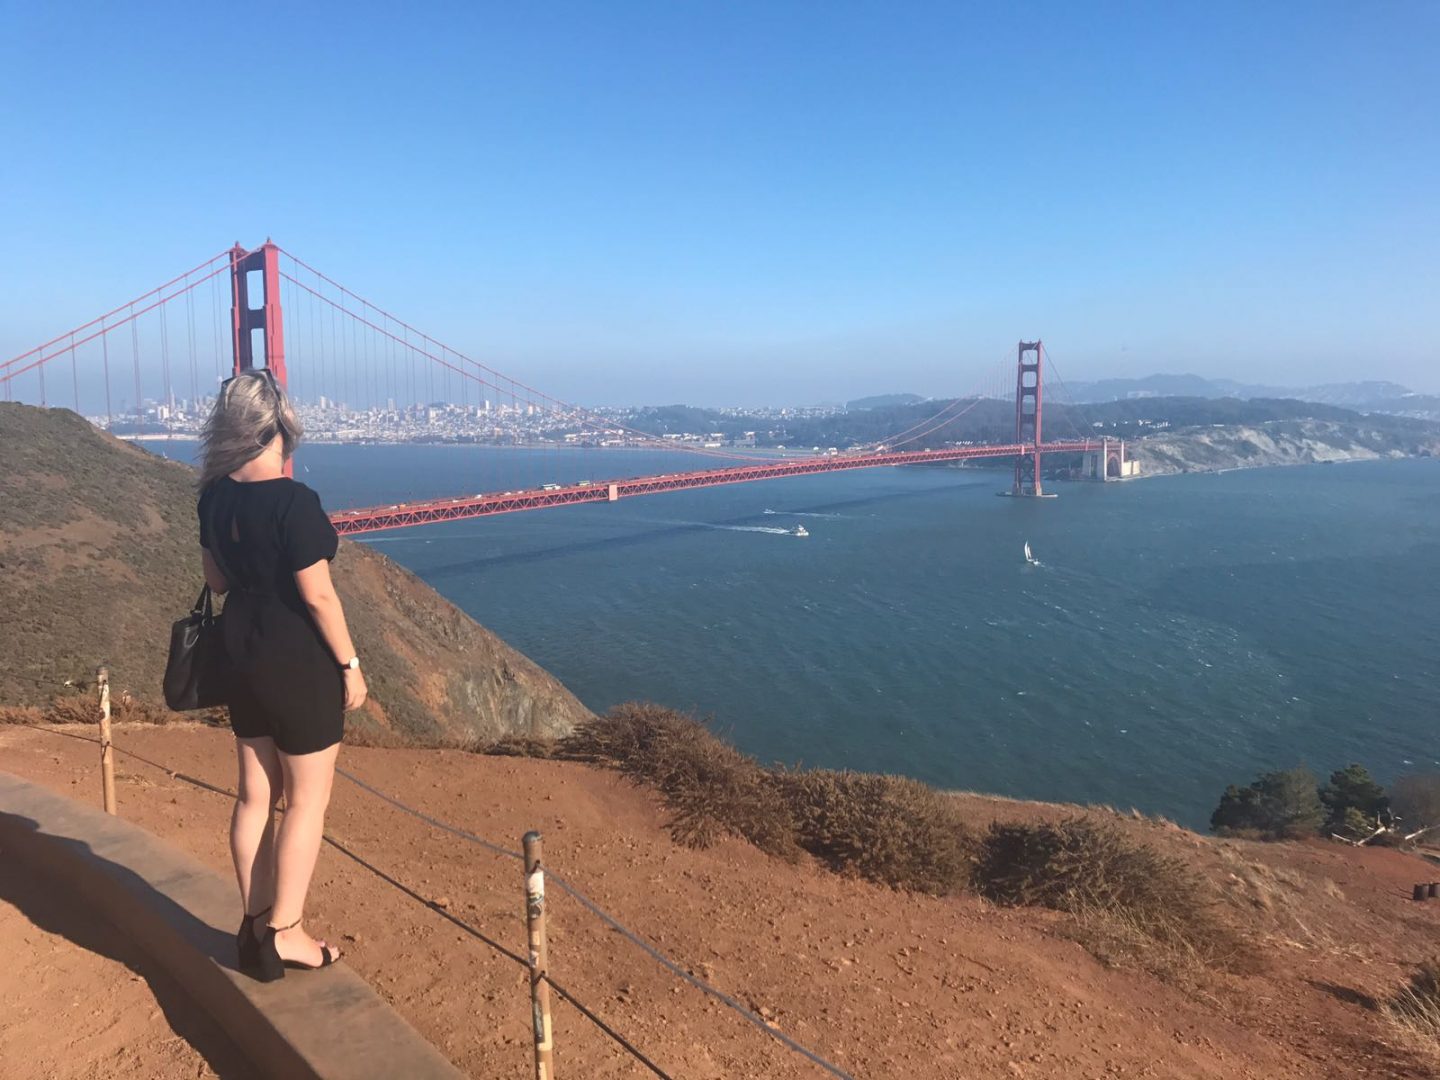 Travelling San Francisco while living in Canada